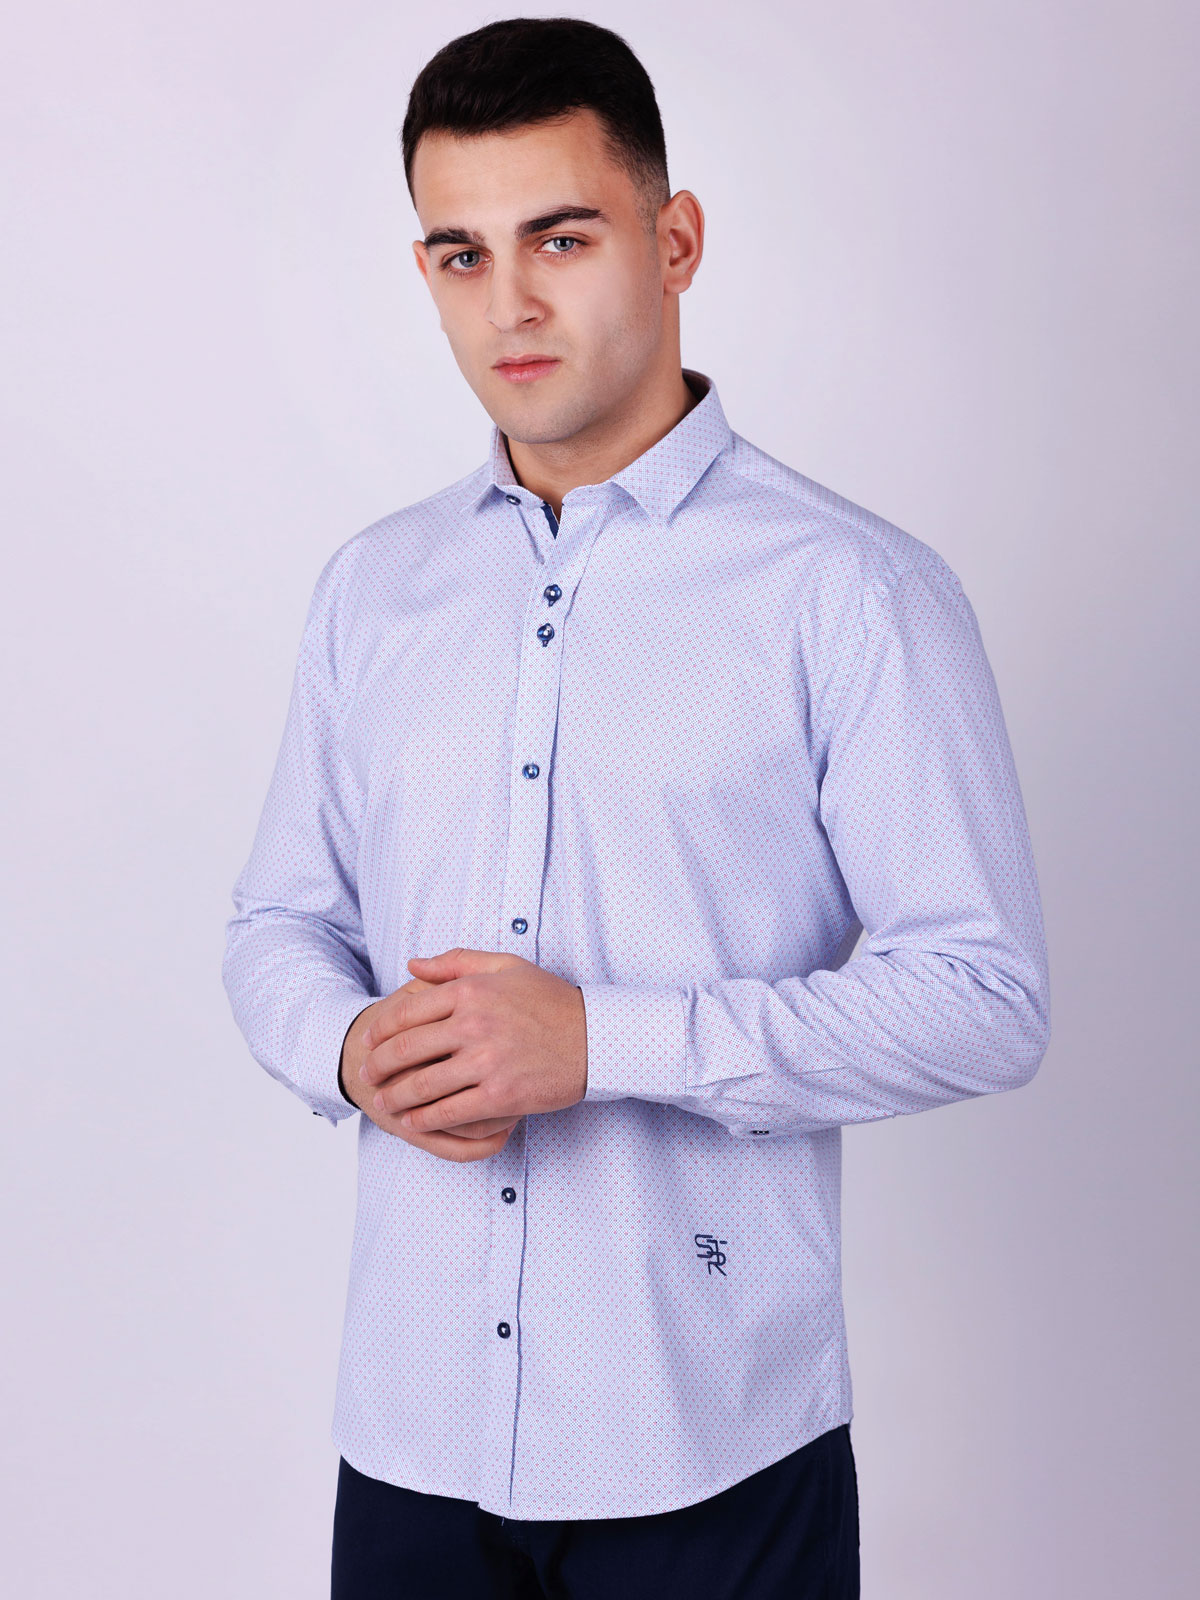 White shirt with blue dots and red figur - 21526 € 30.93 img3